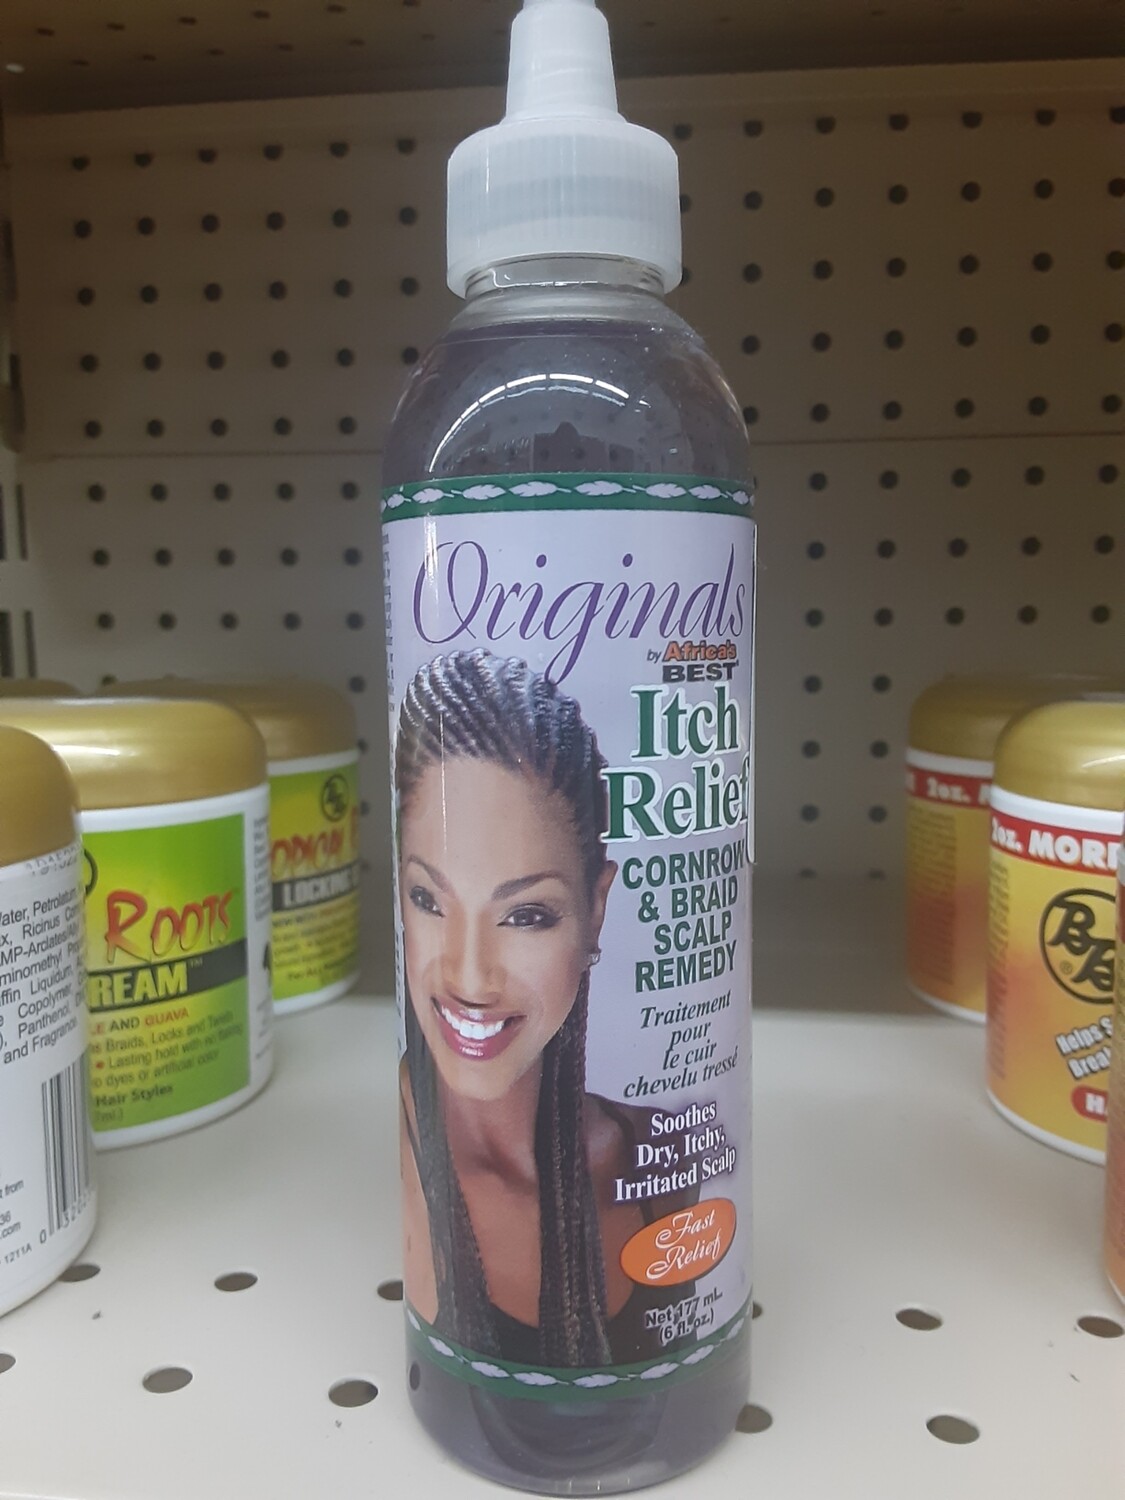 Originals by Africa's best itch relief cornrows and braids scalp remedy